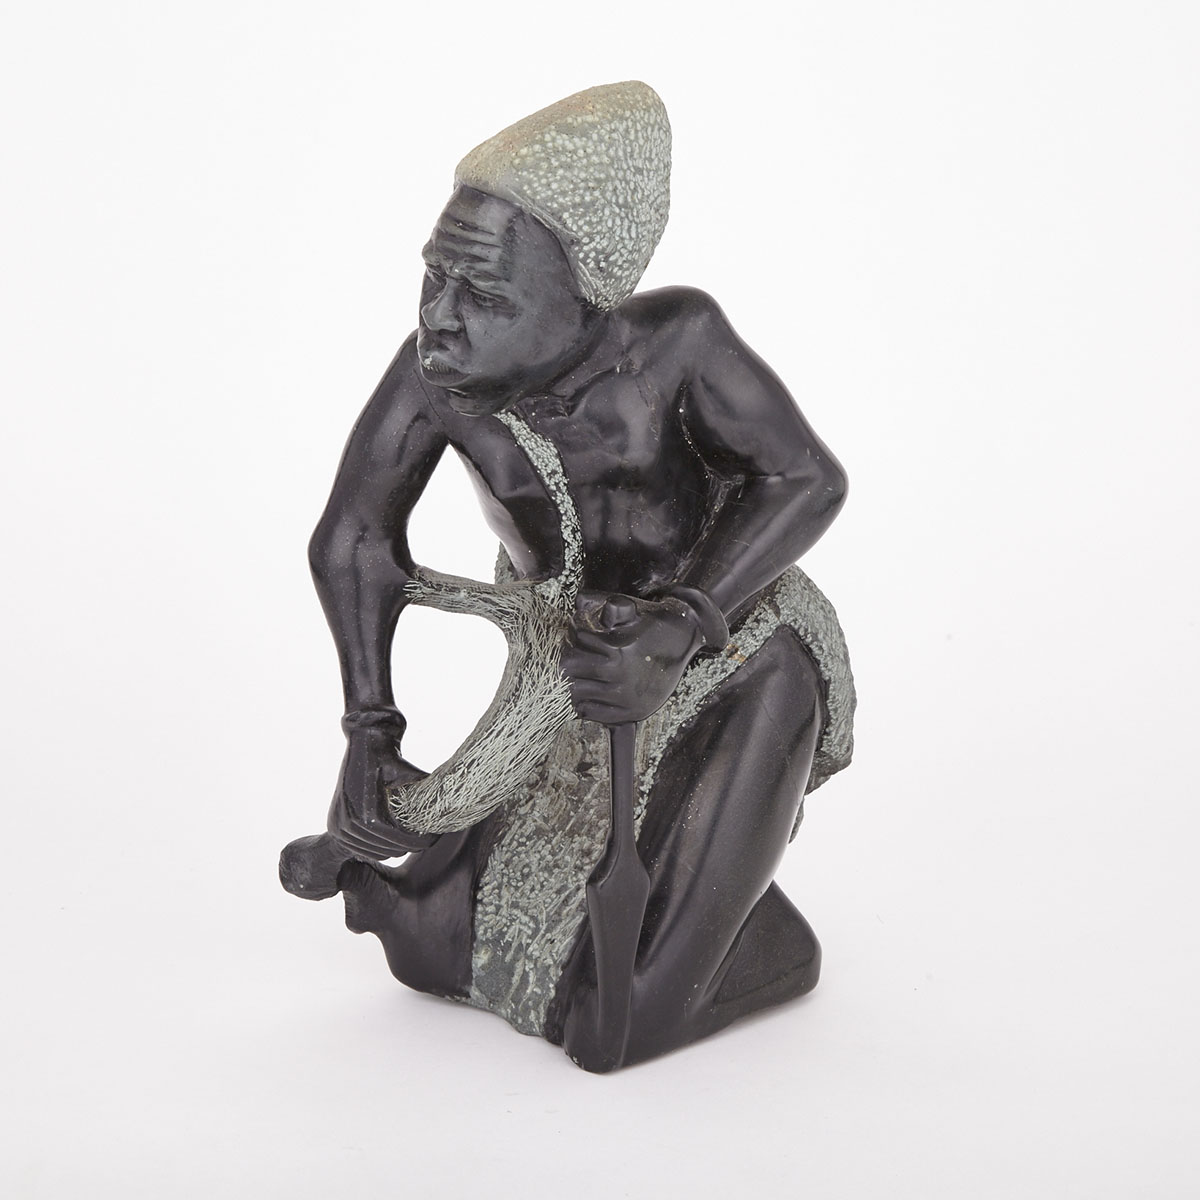 Serpentine Stone Carving a African Man, 20th/21st century